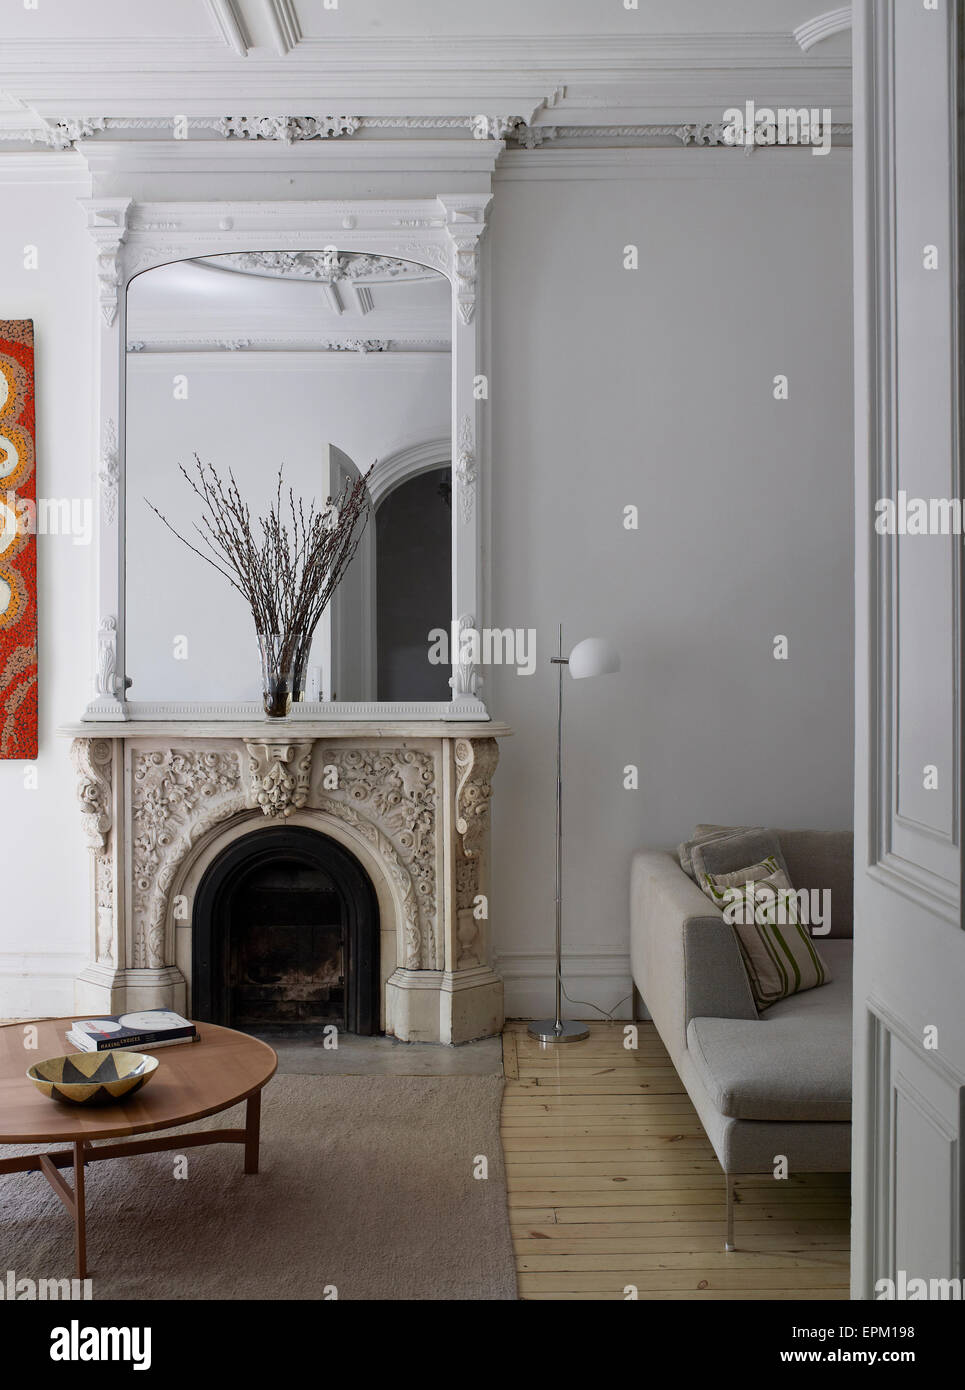 Fireplace And Mirror In Large Living Room With White Plastered